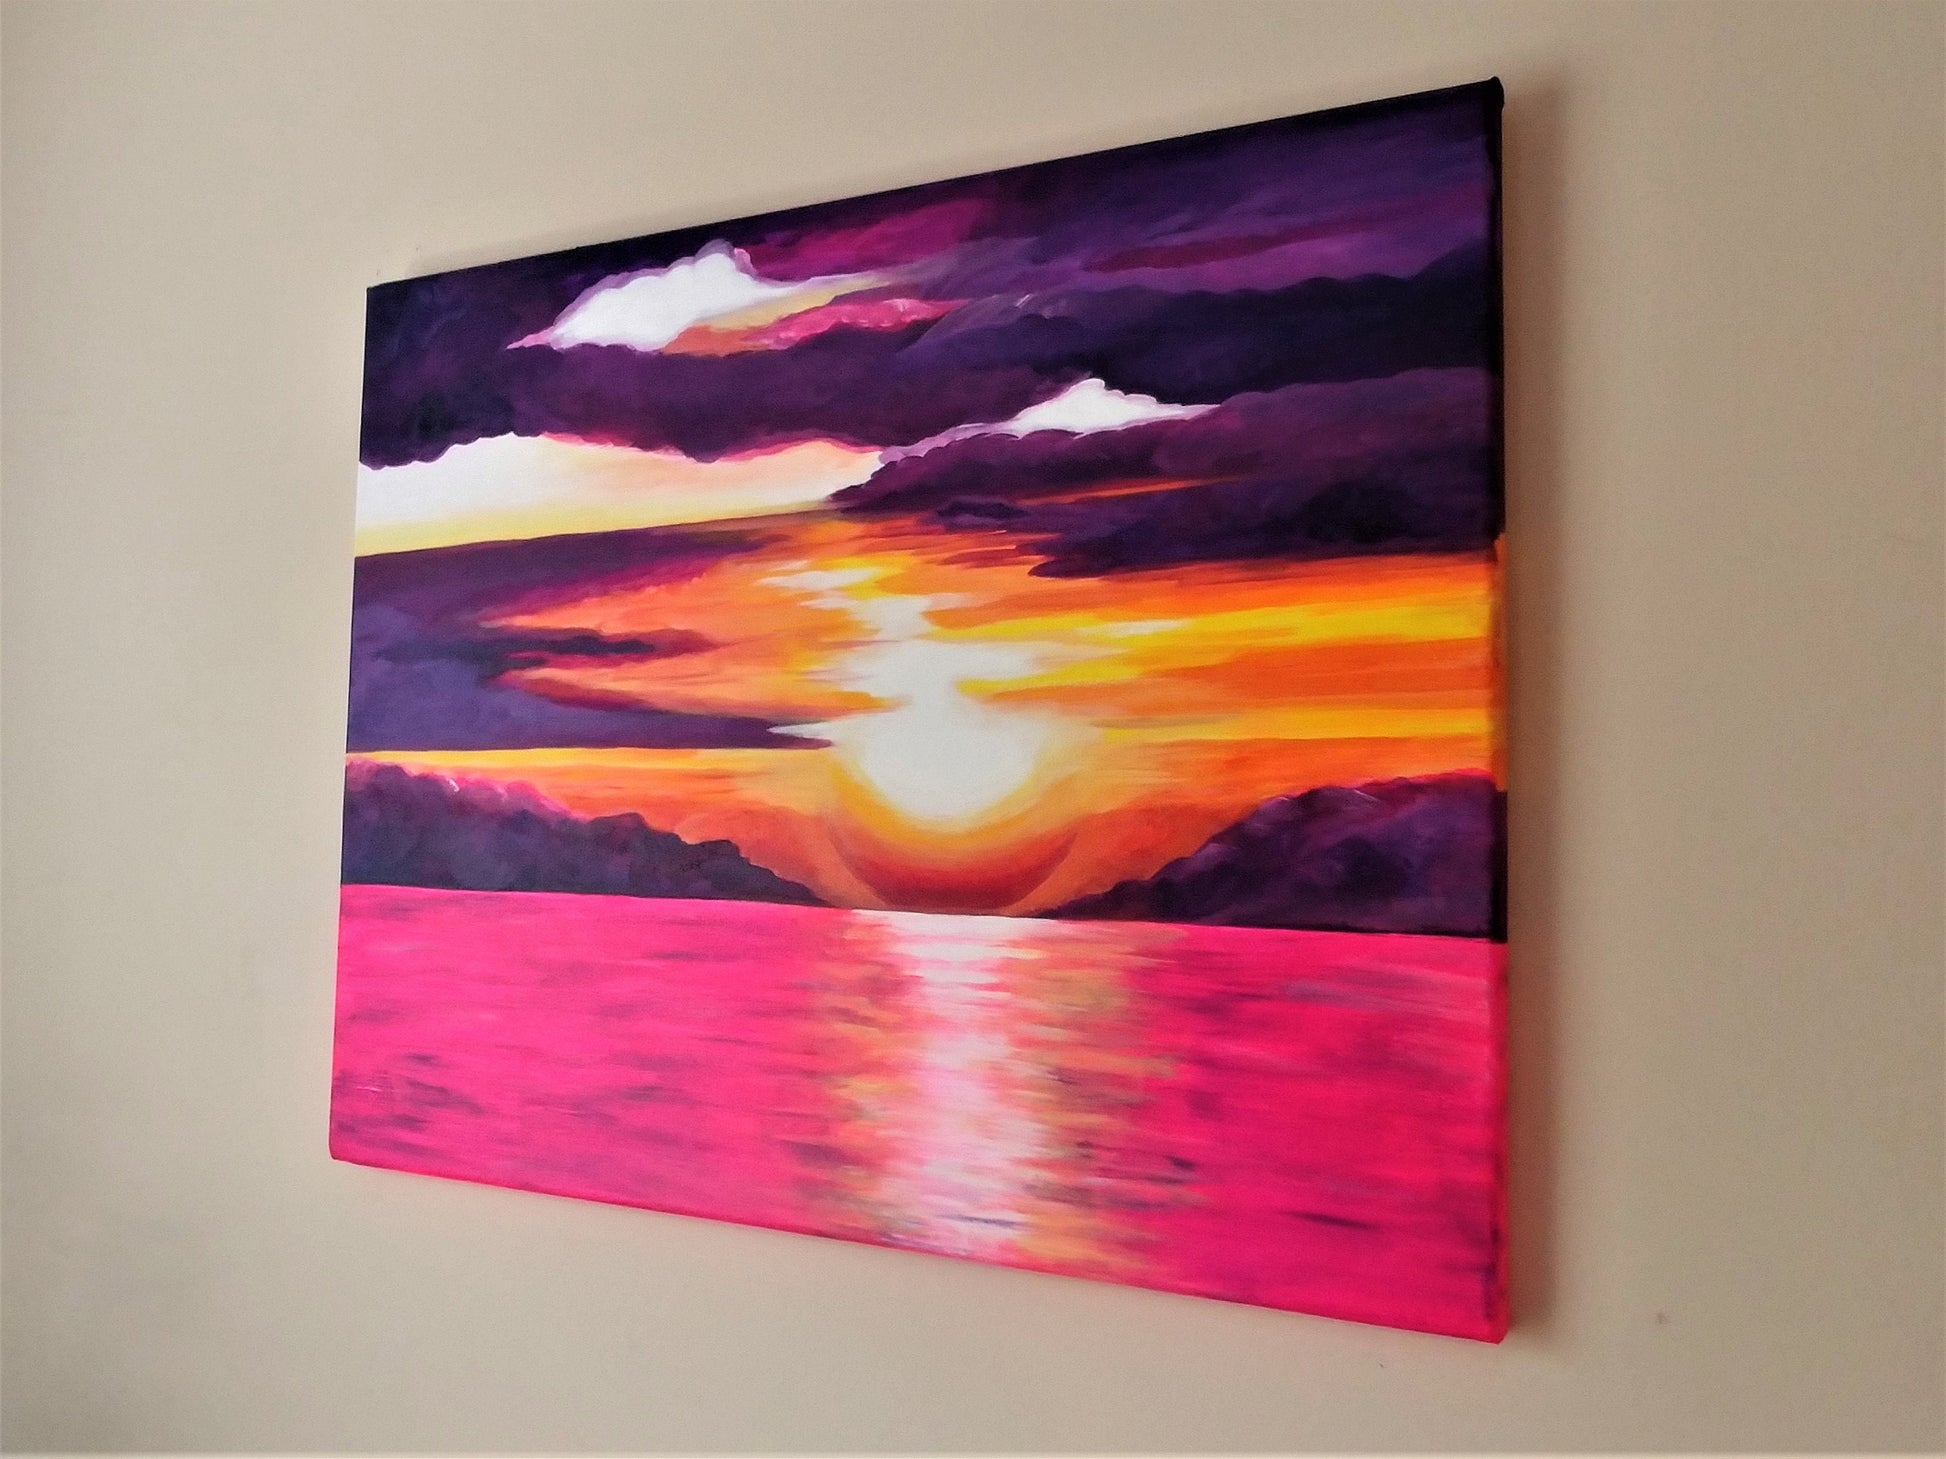 Print of Original Pink and Purple Sunset Over Water Painting, Matted, Vibrant Colors, Beachy / Coastal / Nautical Themed